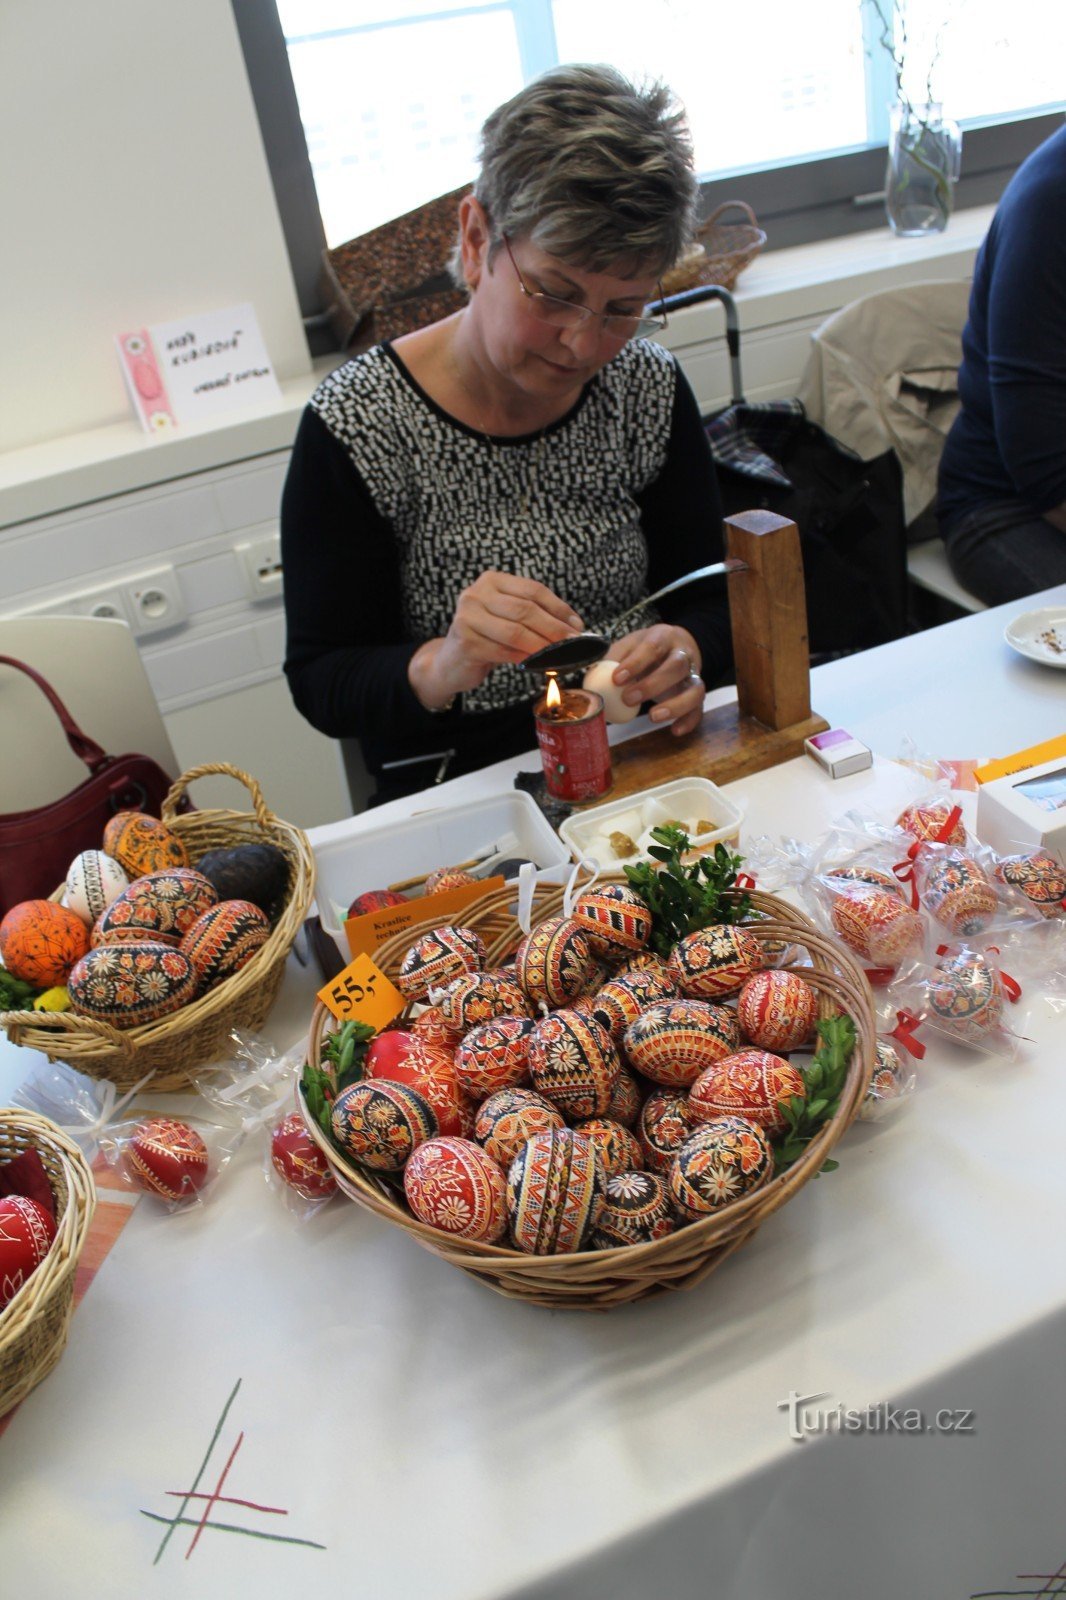 The museum will recreate Easter customs and prepare a baking workshop